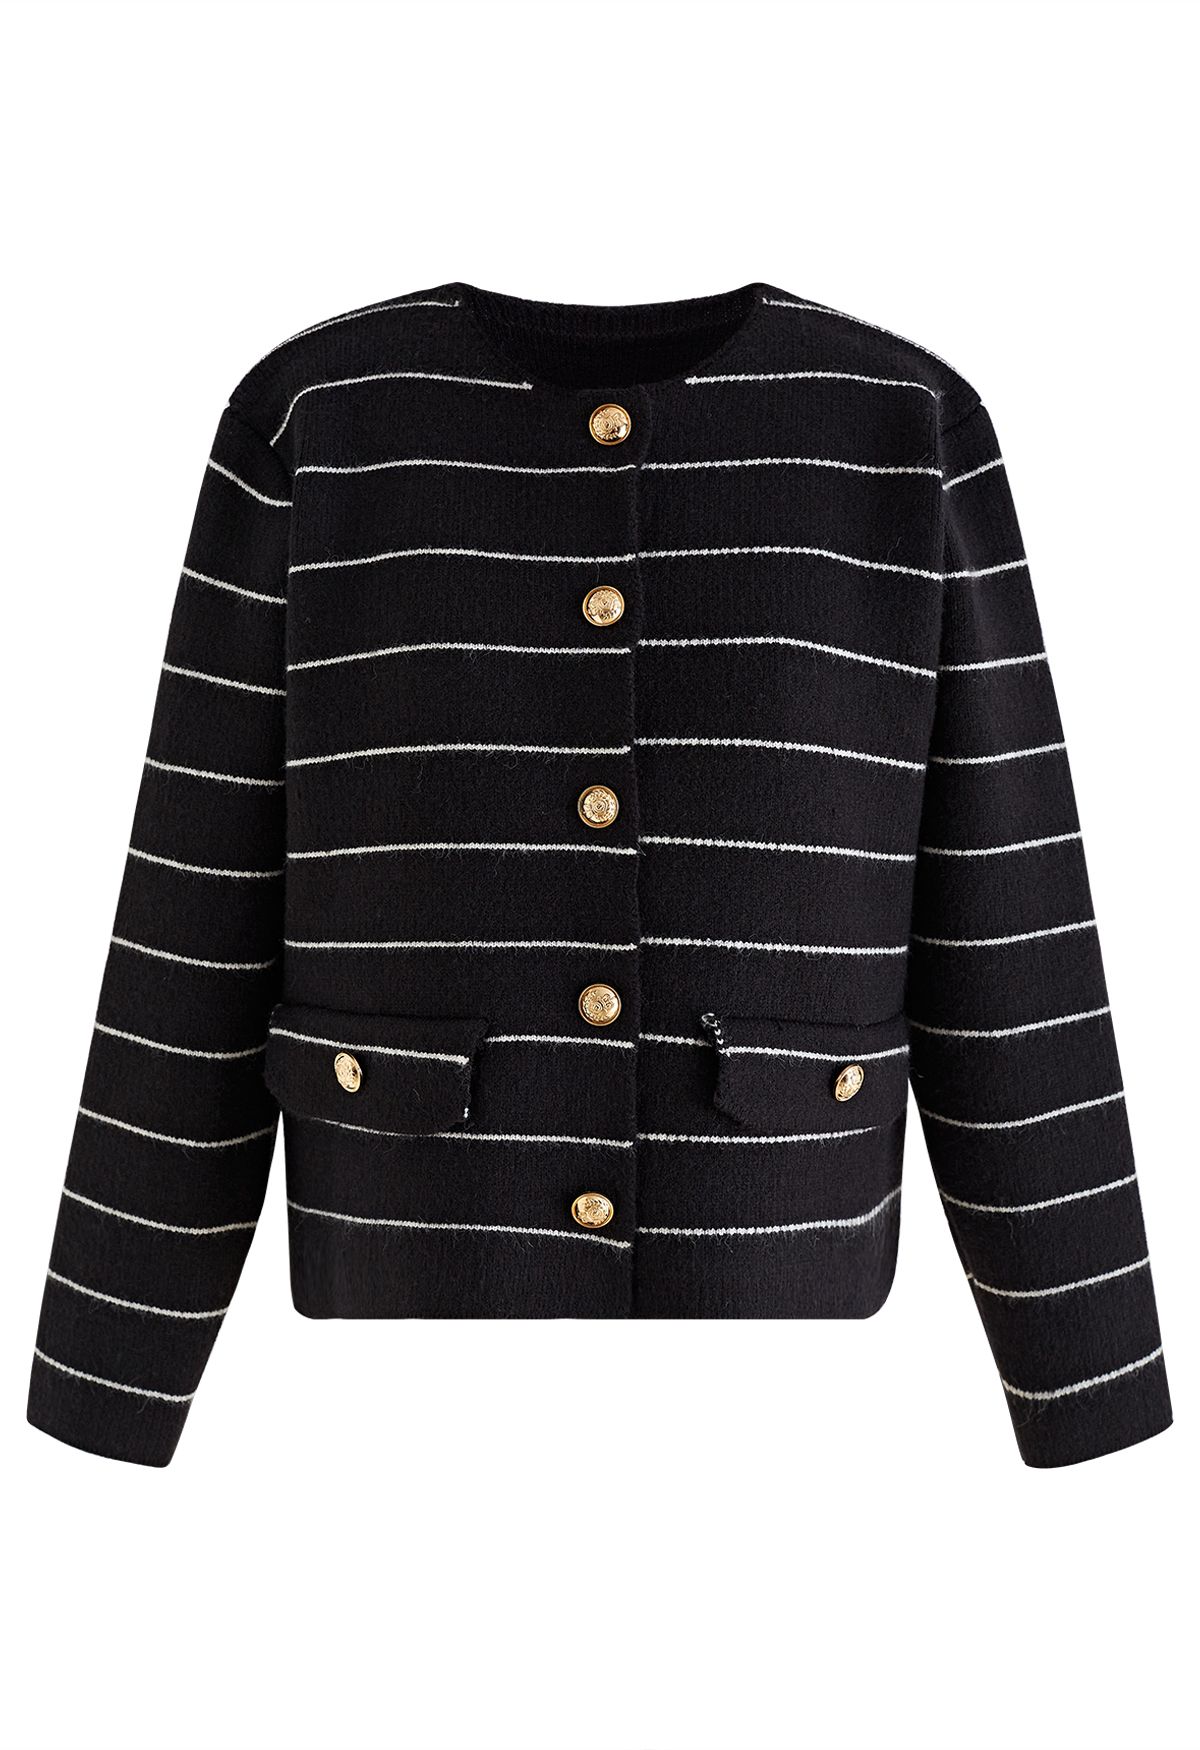 Contrast Stripes Button Down Cardigan in Black - Retro, Indie and ...